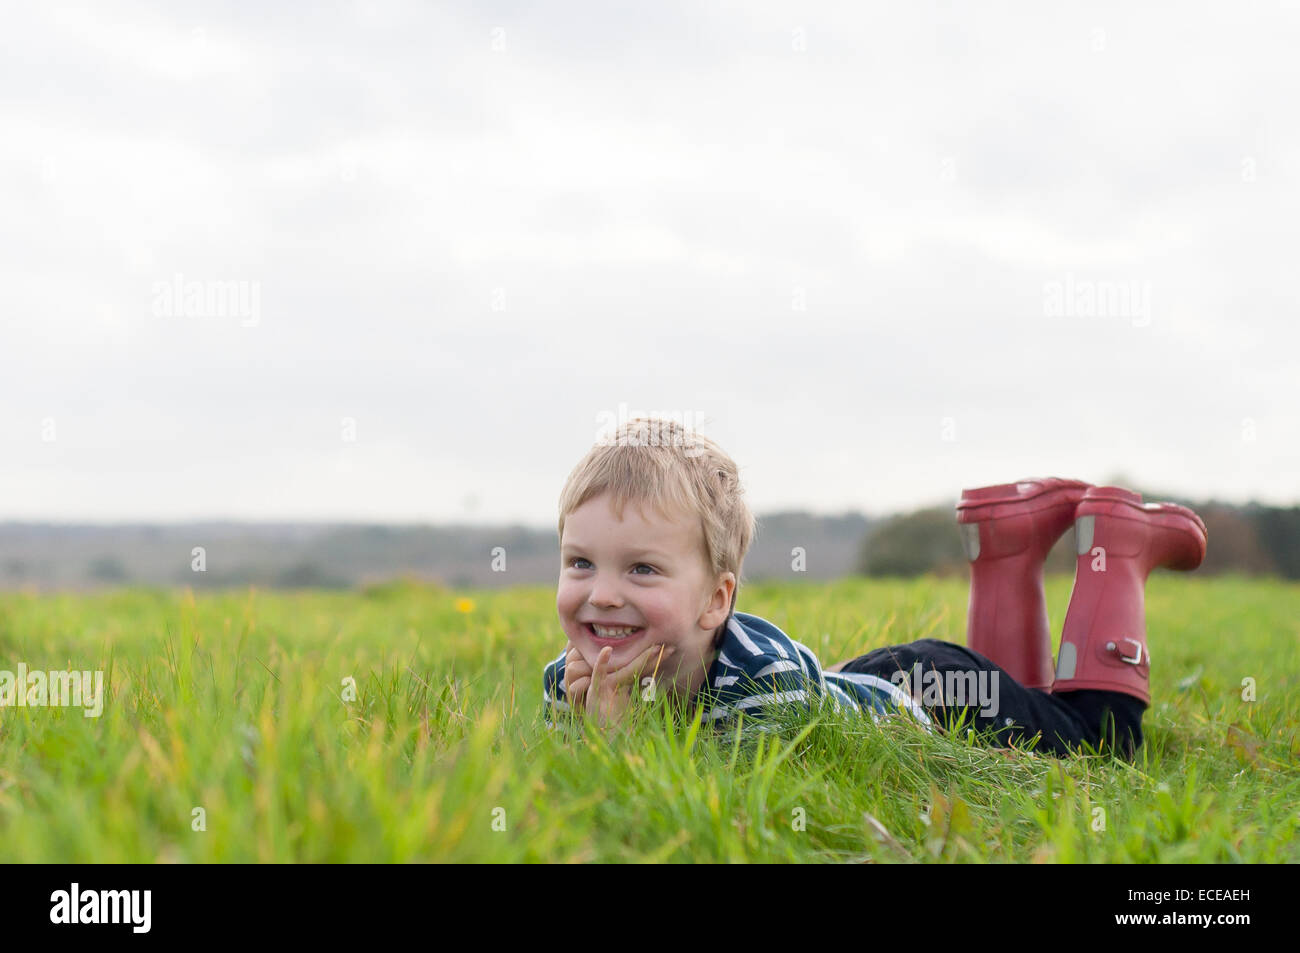 Boy lying in grass Banque D'Images